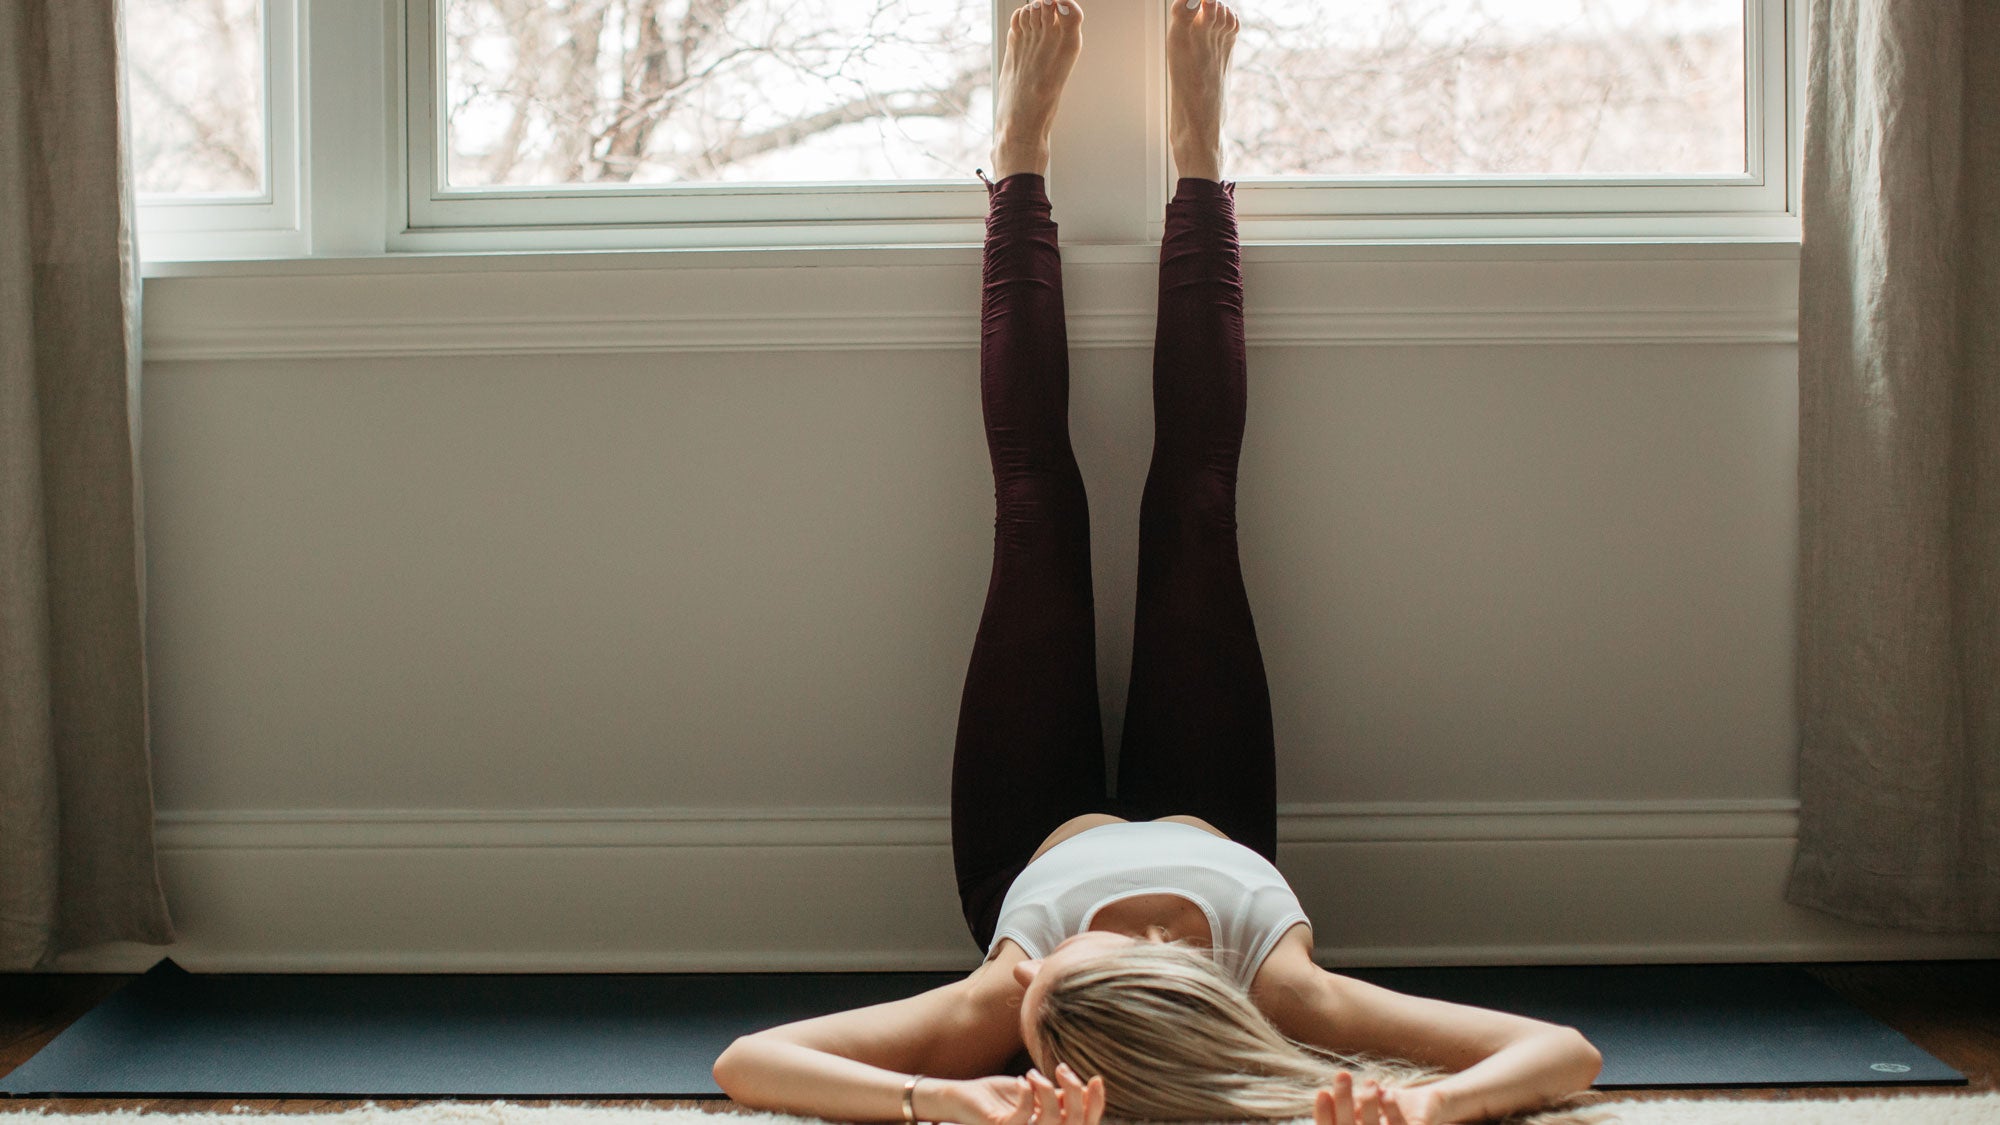 Our 10 Best Yoga Poses For Two People (#10 Is Fun...But Powerful)